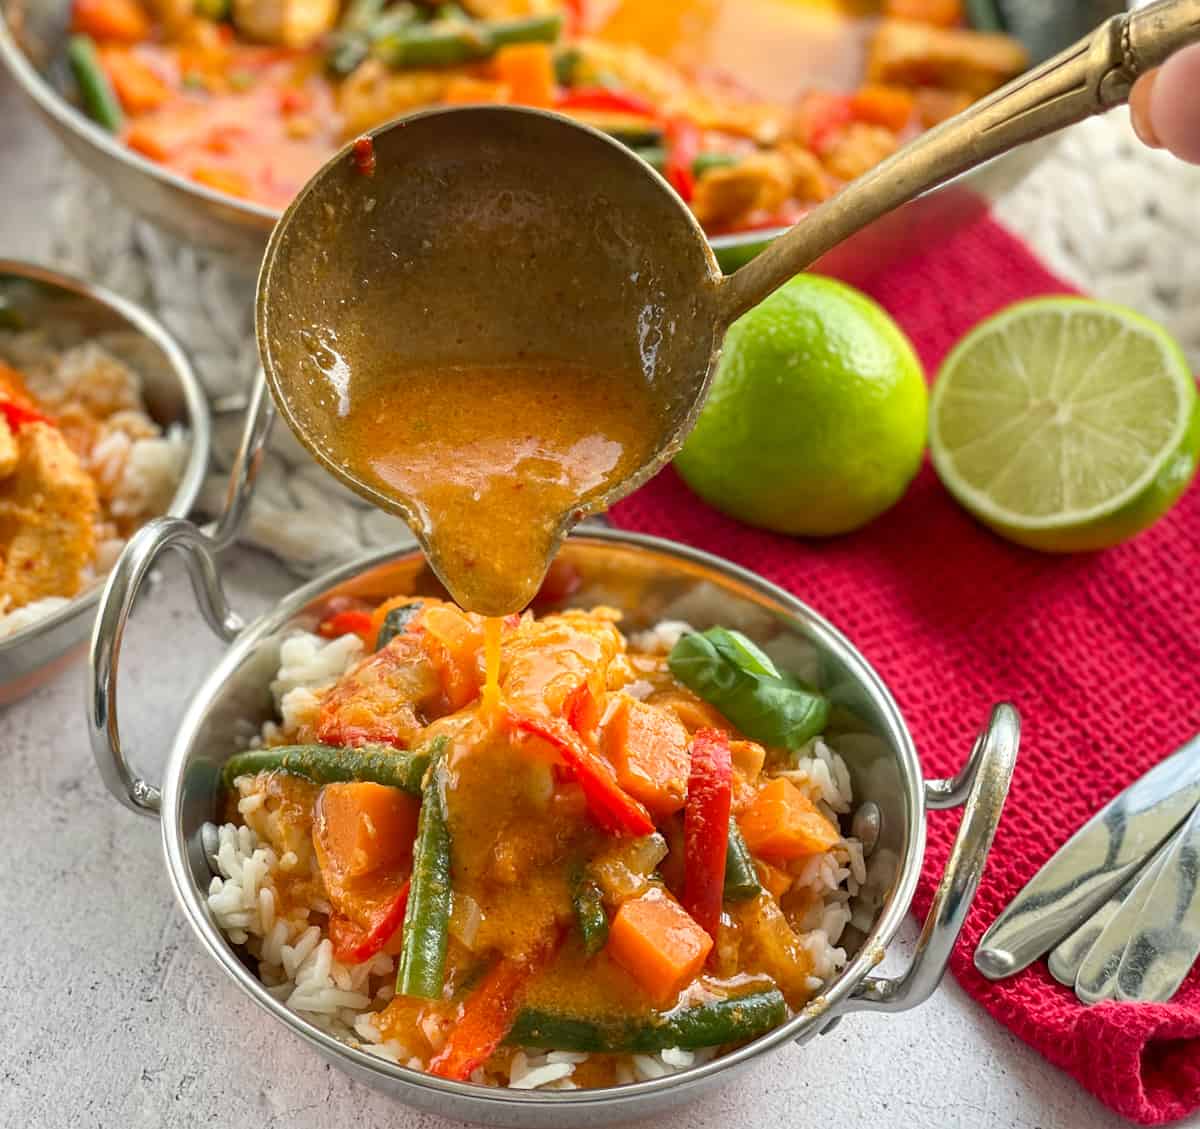 Pouring a ladle of red curry sauce over a bowl of chicken and kumara curry on rice